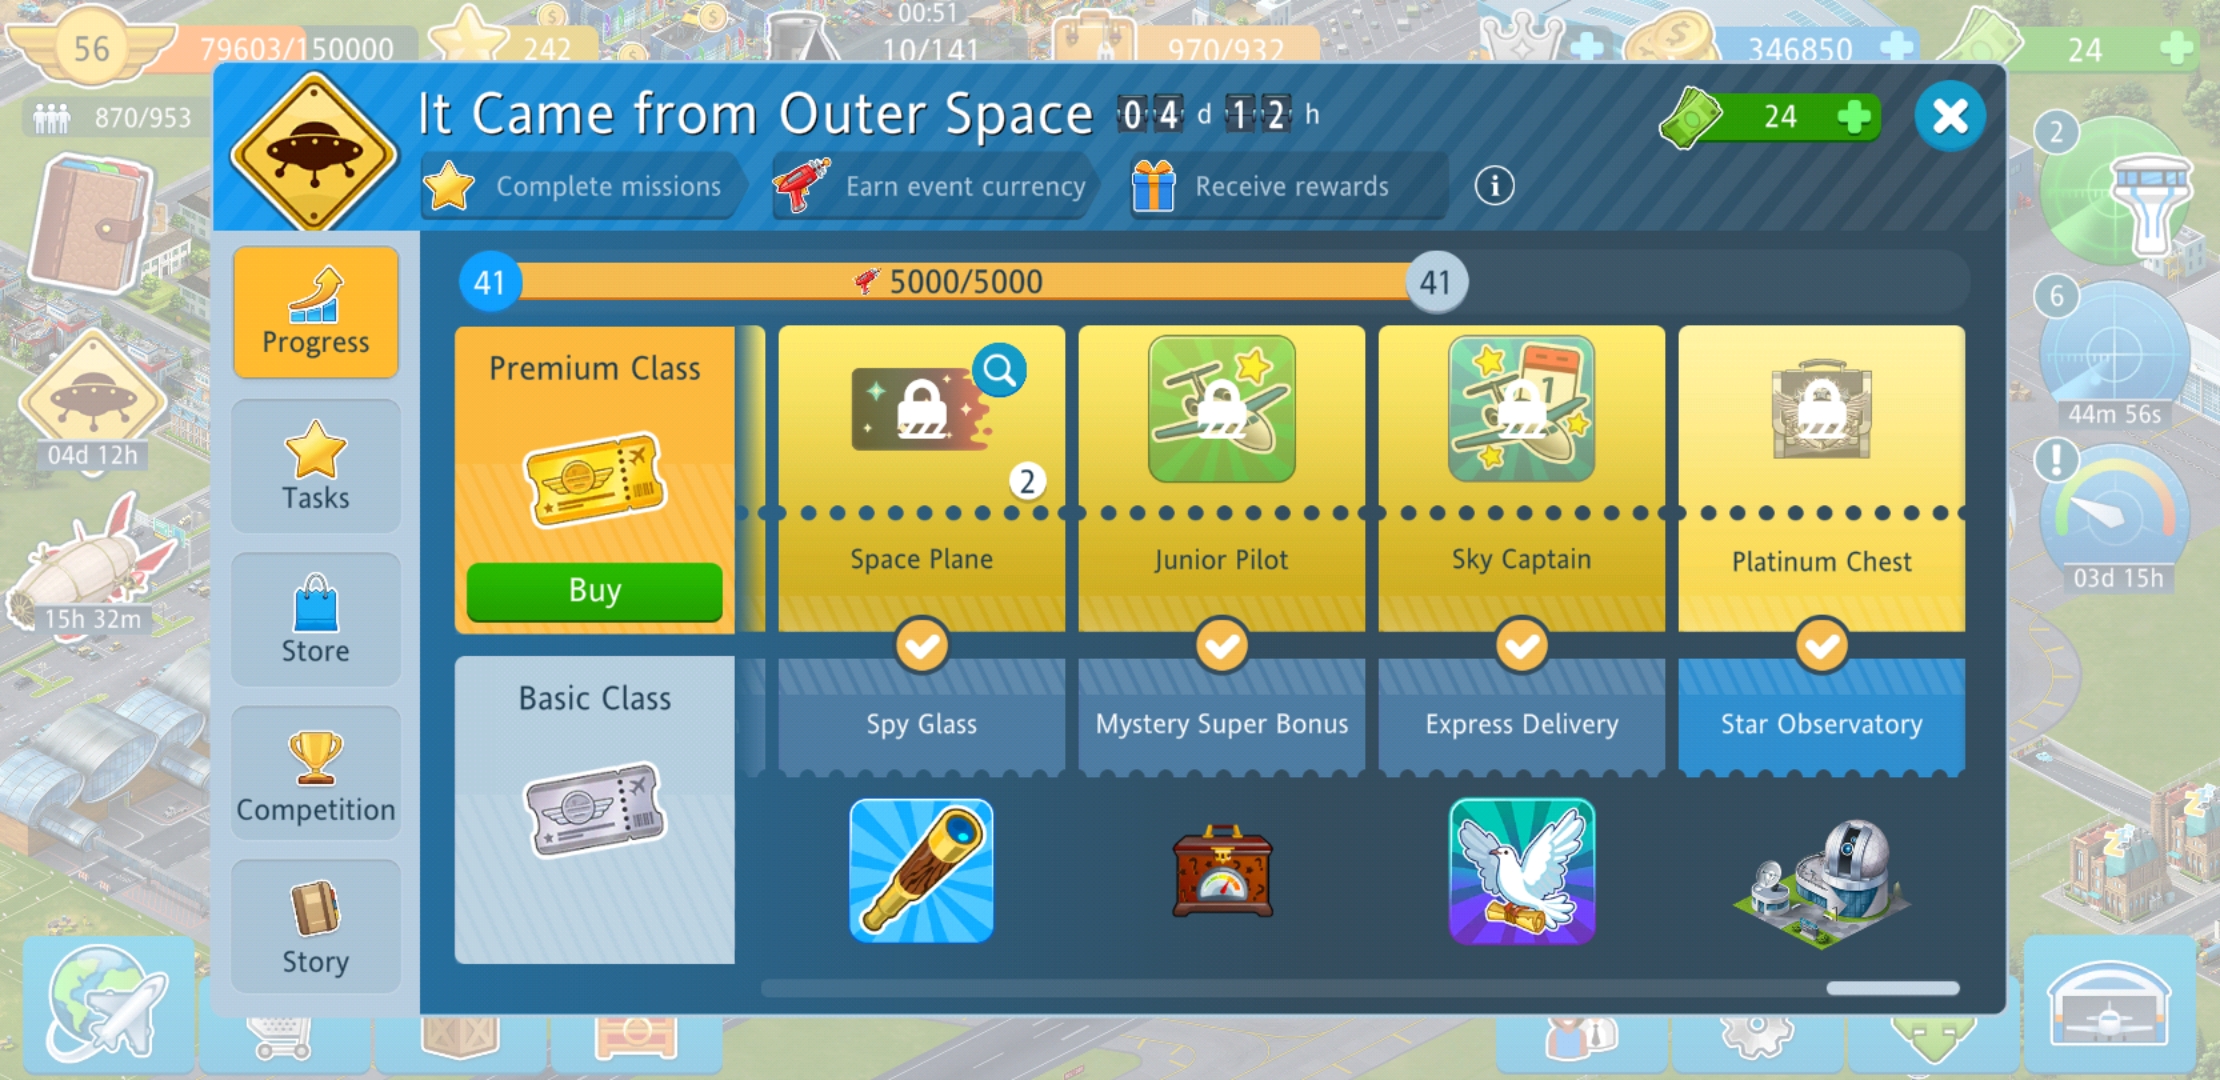 Airport City - Event - It Came From Outer Space - 05-2022 - Completed.jpg